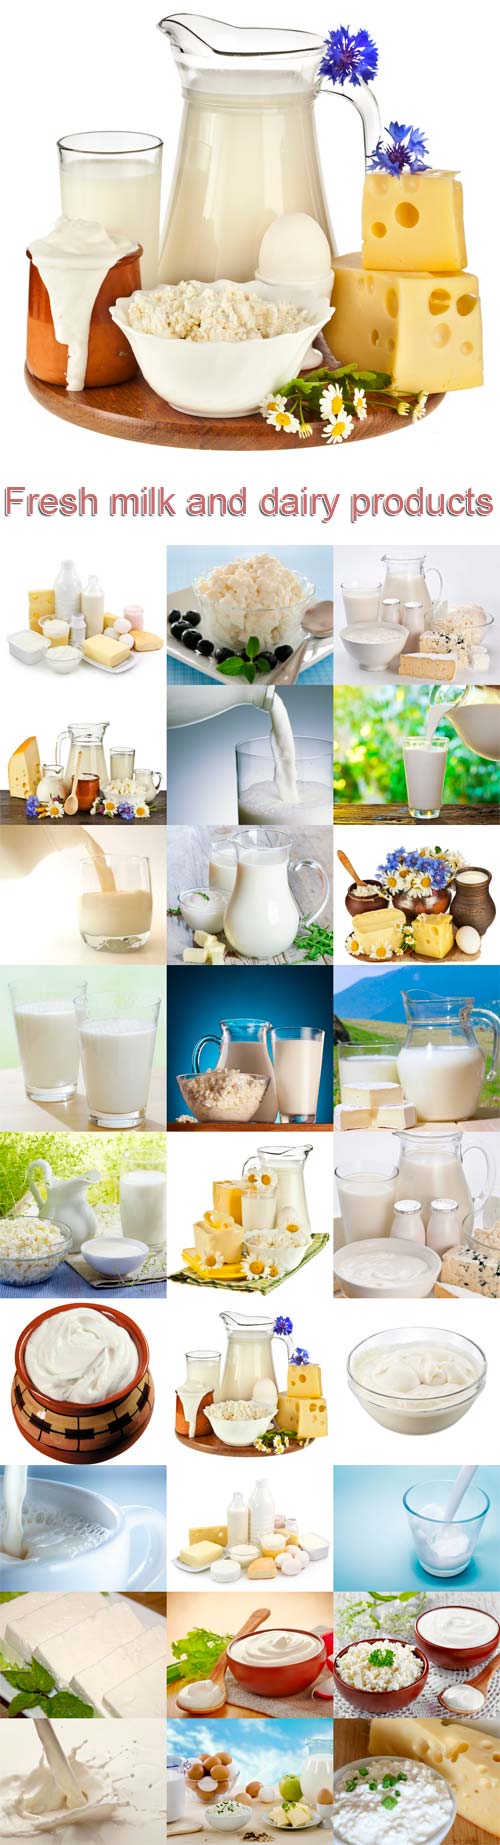 Fresh milk and dairy products